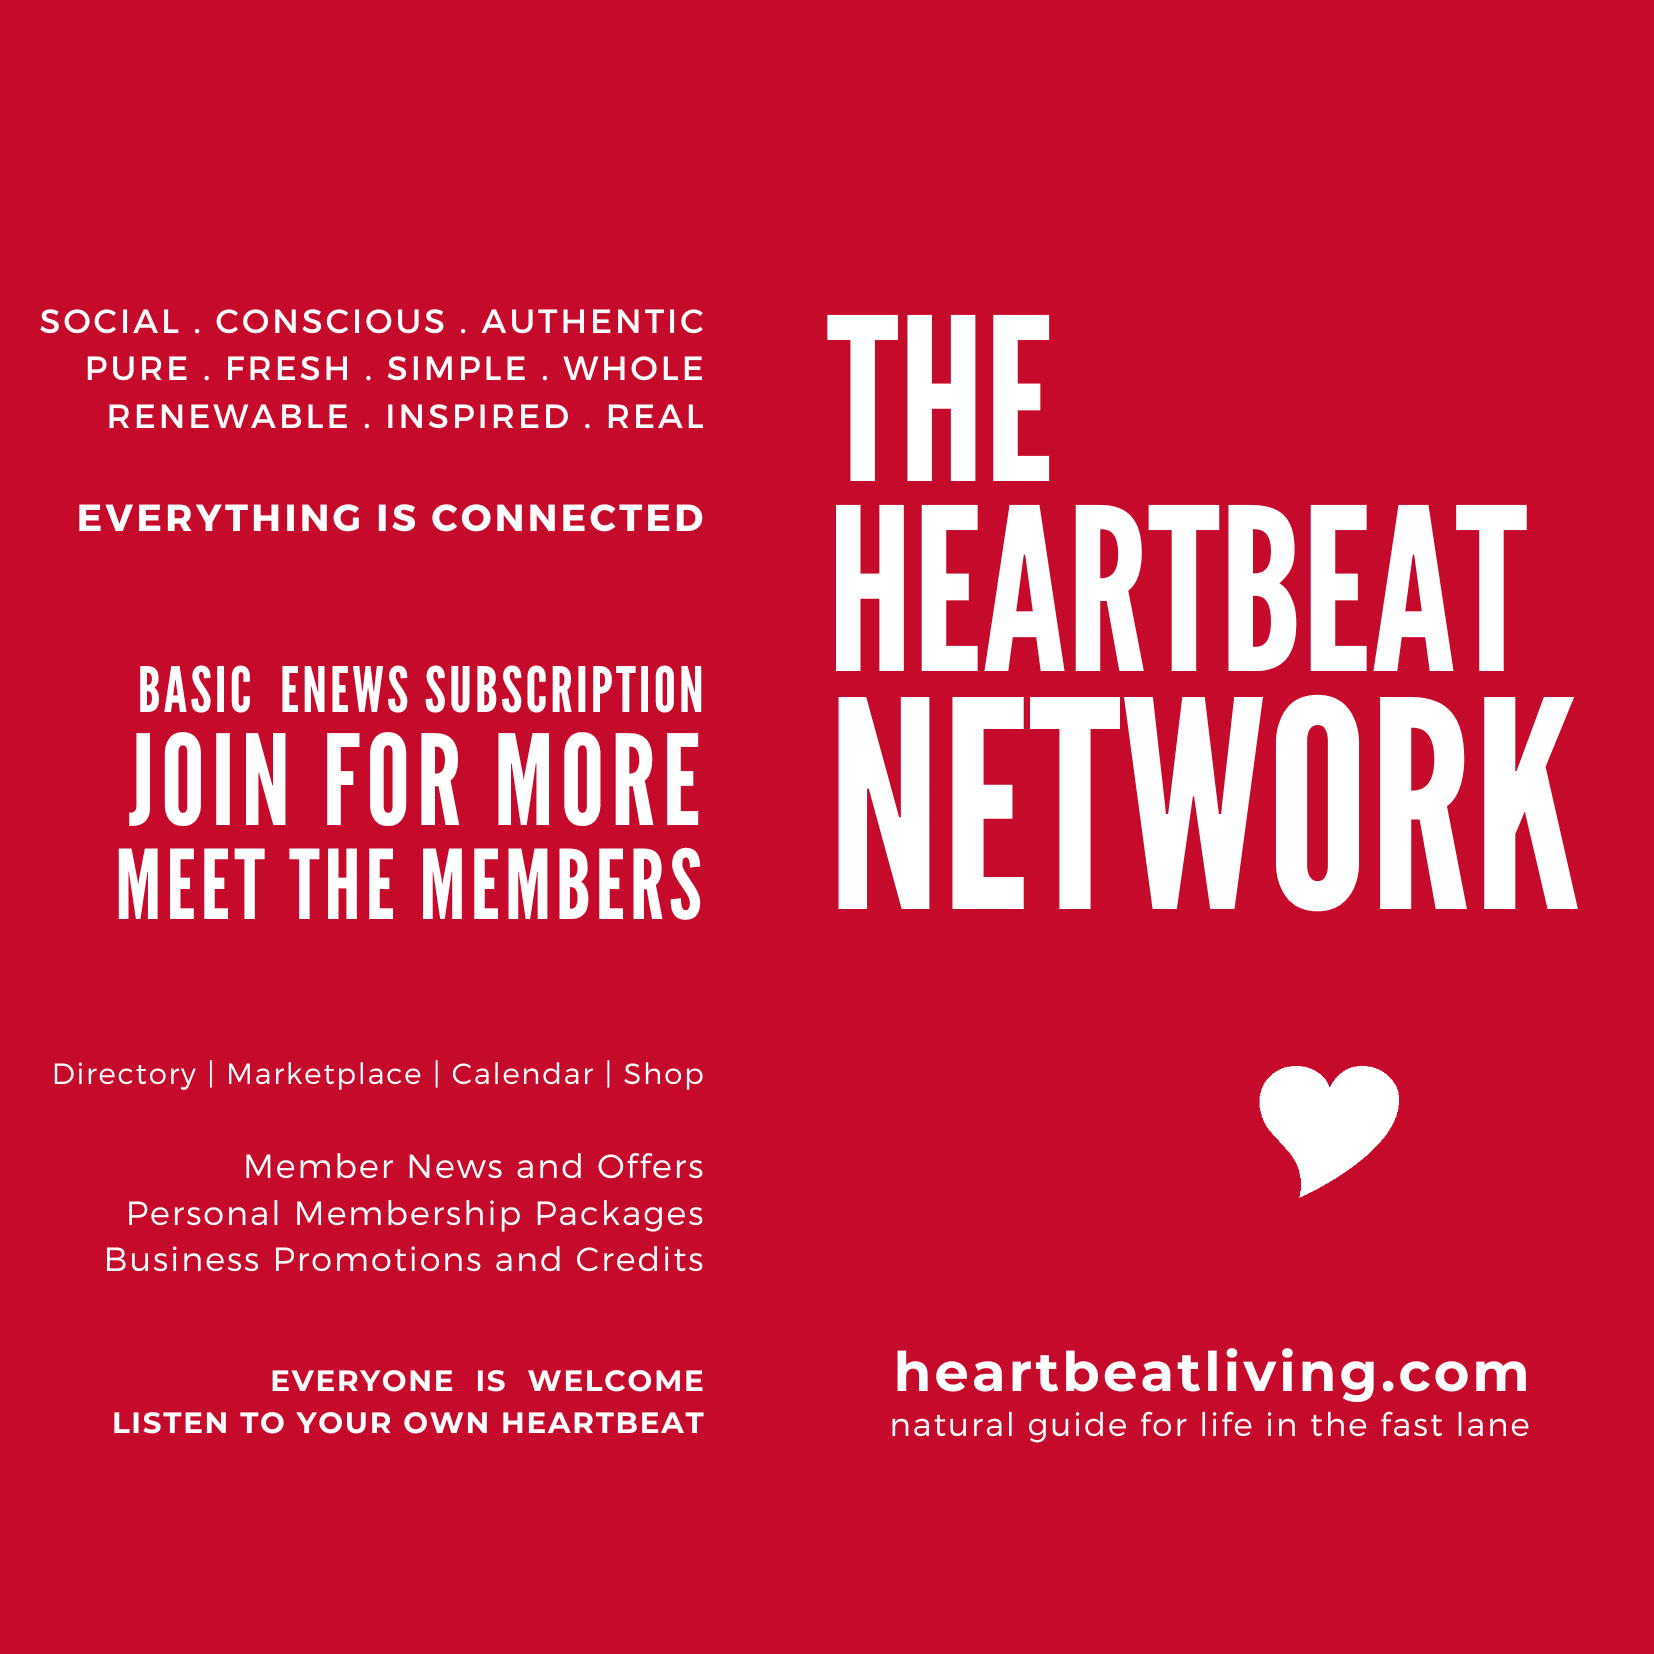 The heartbeat network -- listen to your own heartbeat